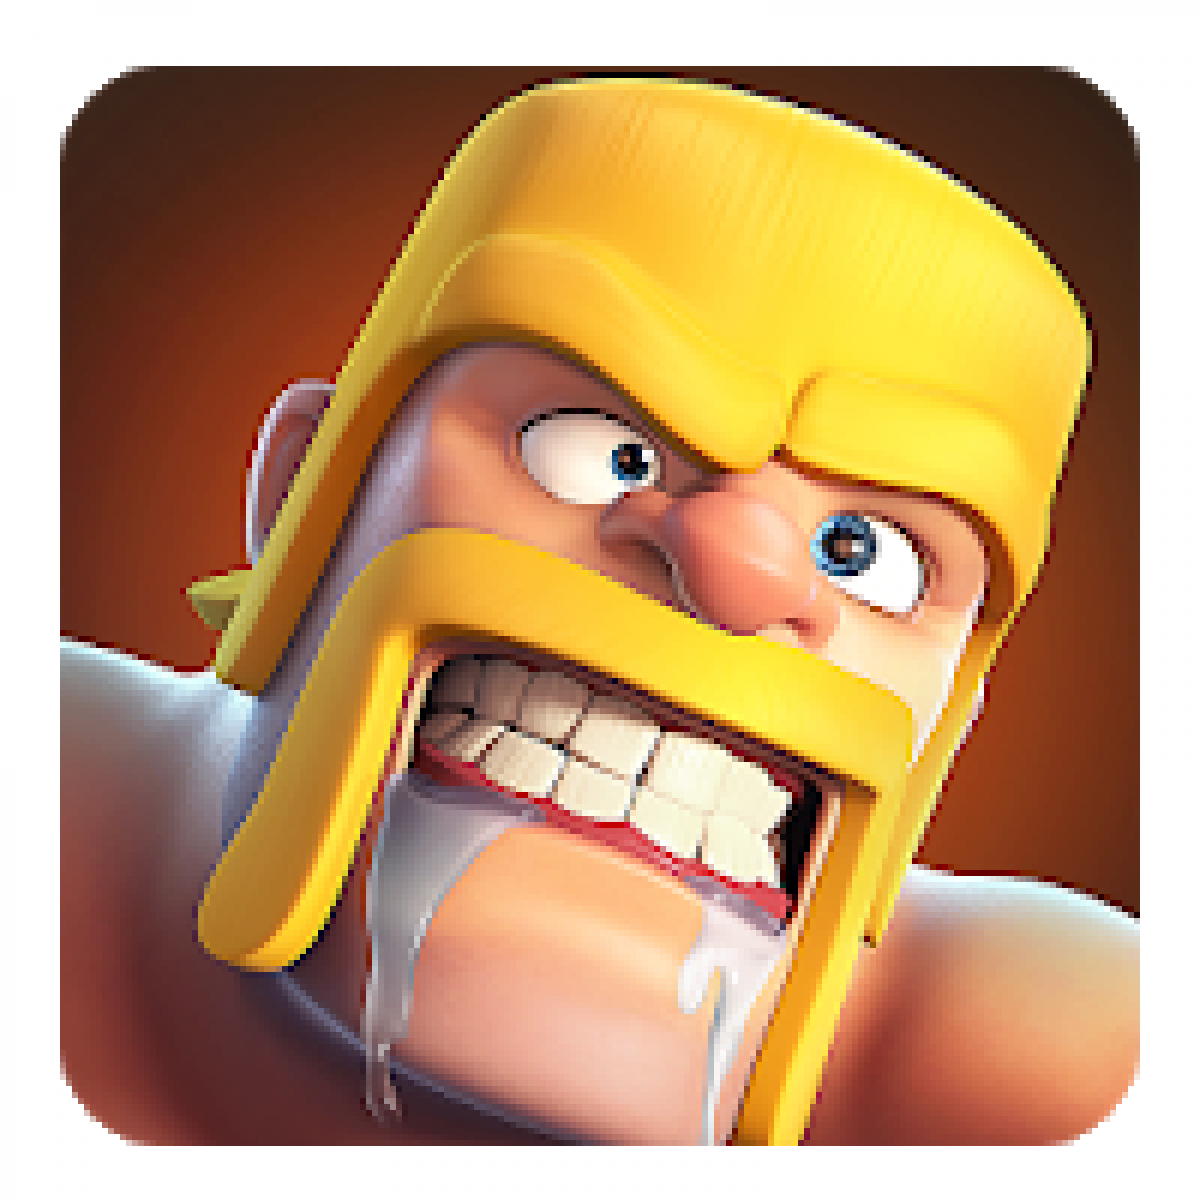 download clash of clans for pc offline